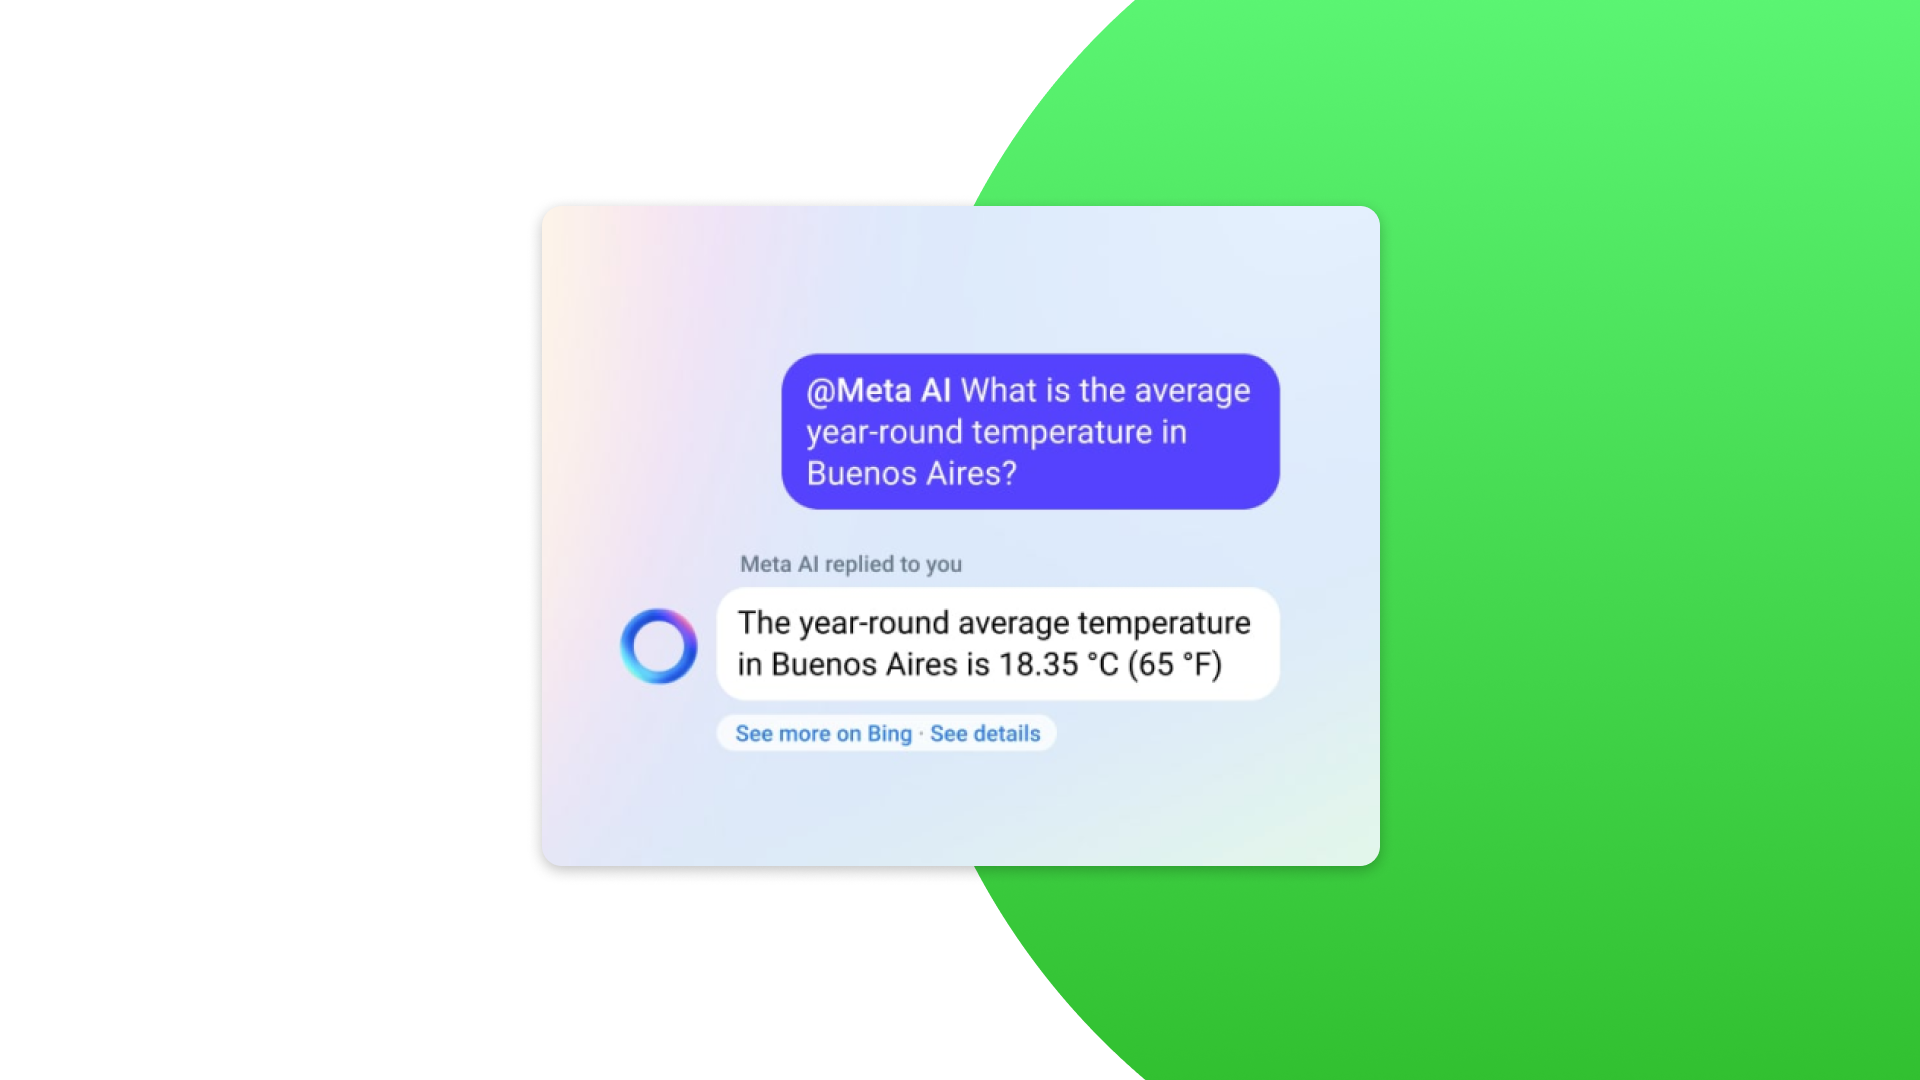 Meta AI assistant is an easy and versatile tool that supports natural language